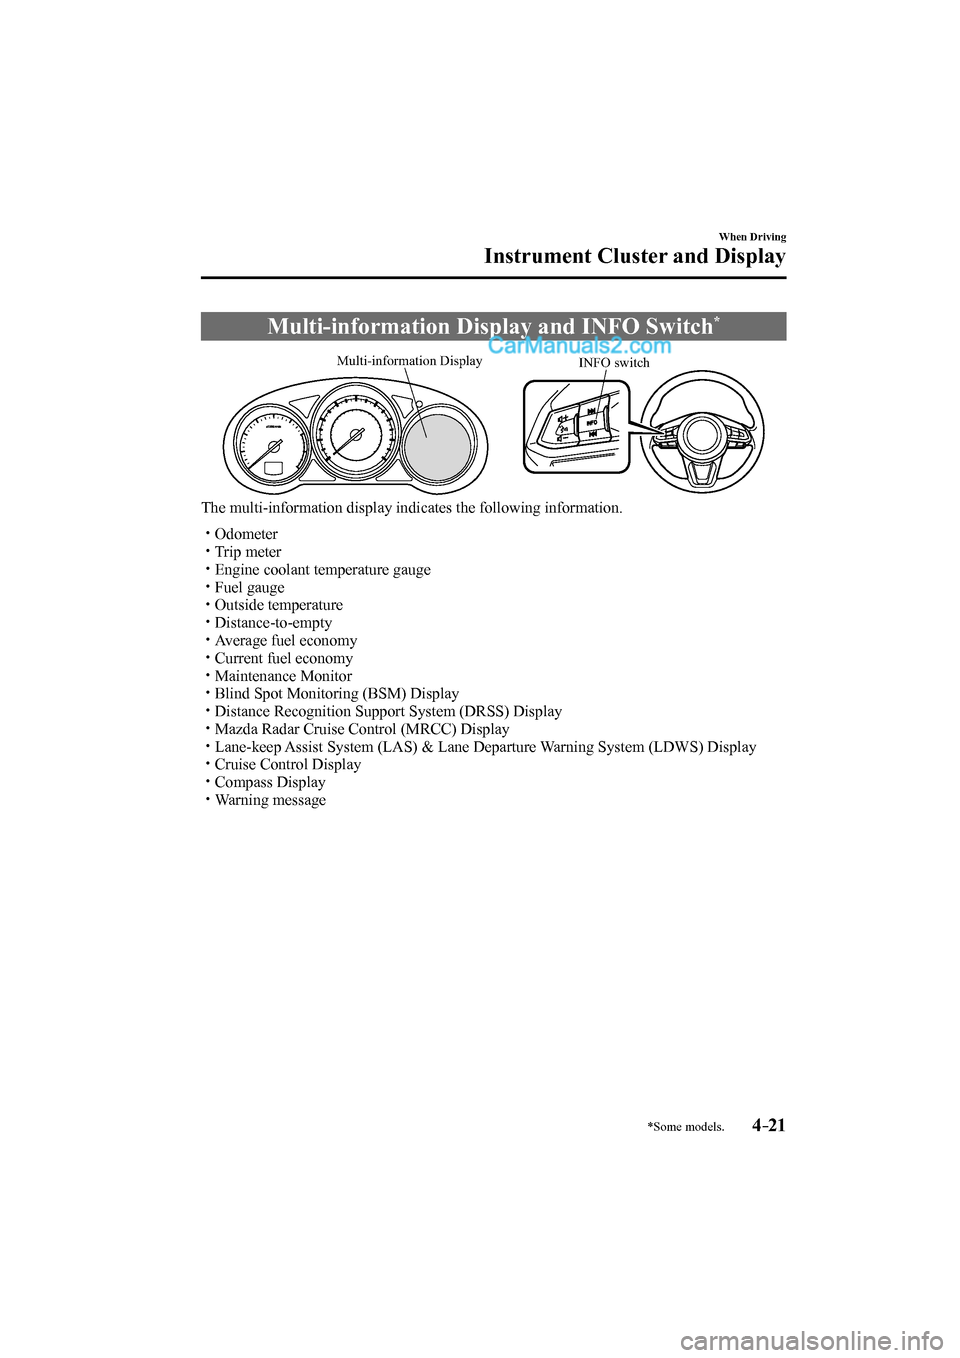 MAZDA MODEL CX-9 2017  Owners Manual (in English) 4–21
When Driving
Instrument Cluster and Display
*Some models.
 Multi-information Display and INFO Switch * 
             
INFO switch Multi-information Display
 
The multi-information display indic